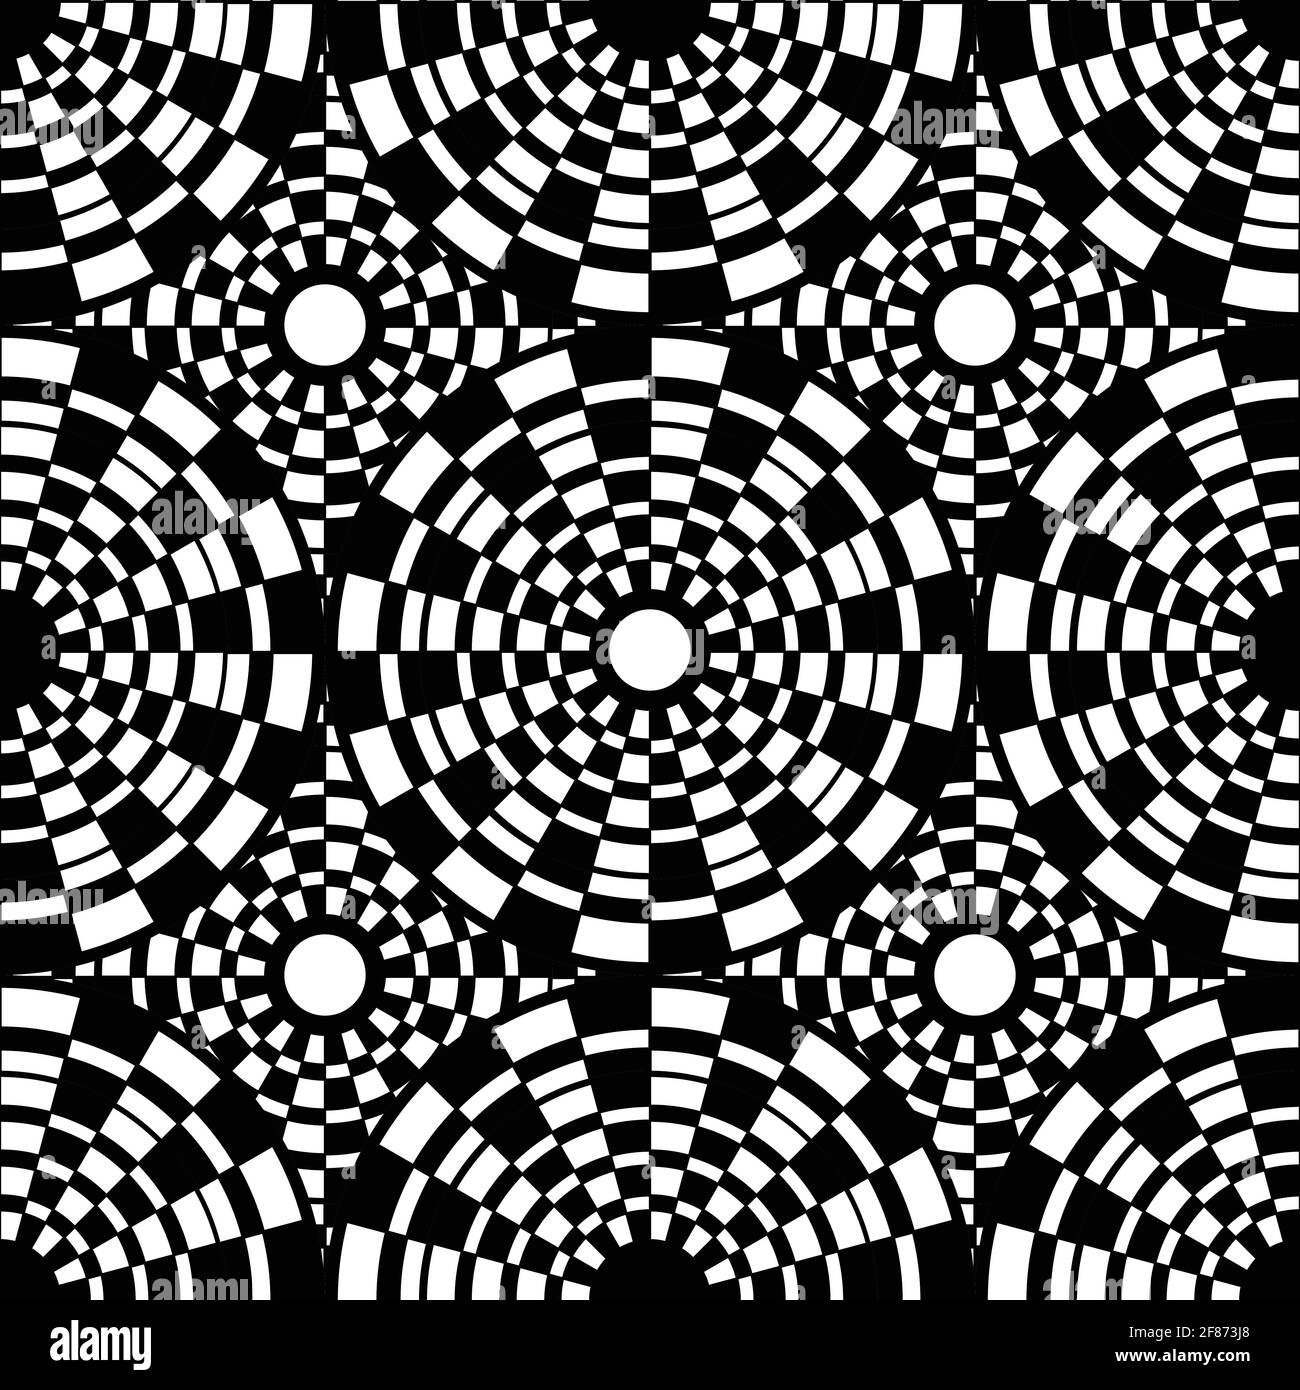 Seamless black and white pattern in the form of abstract circles. vector Stock Vector